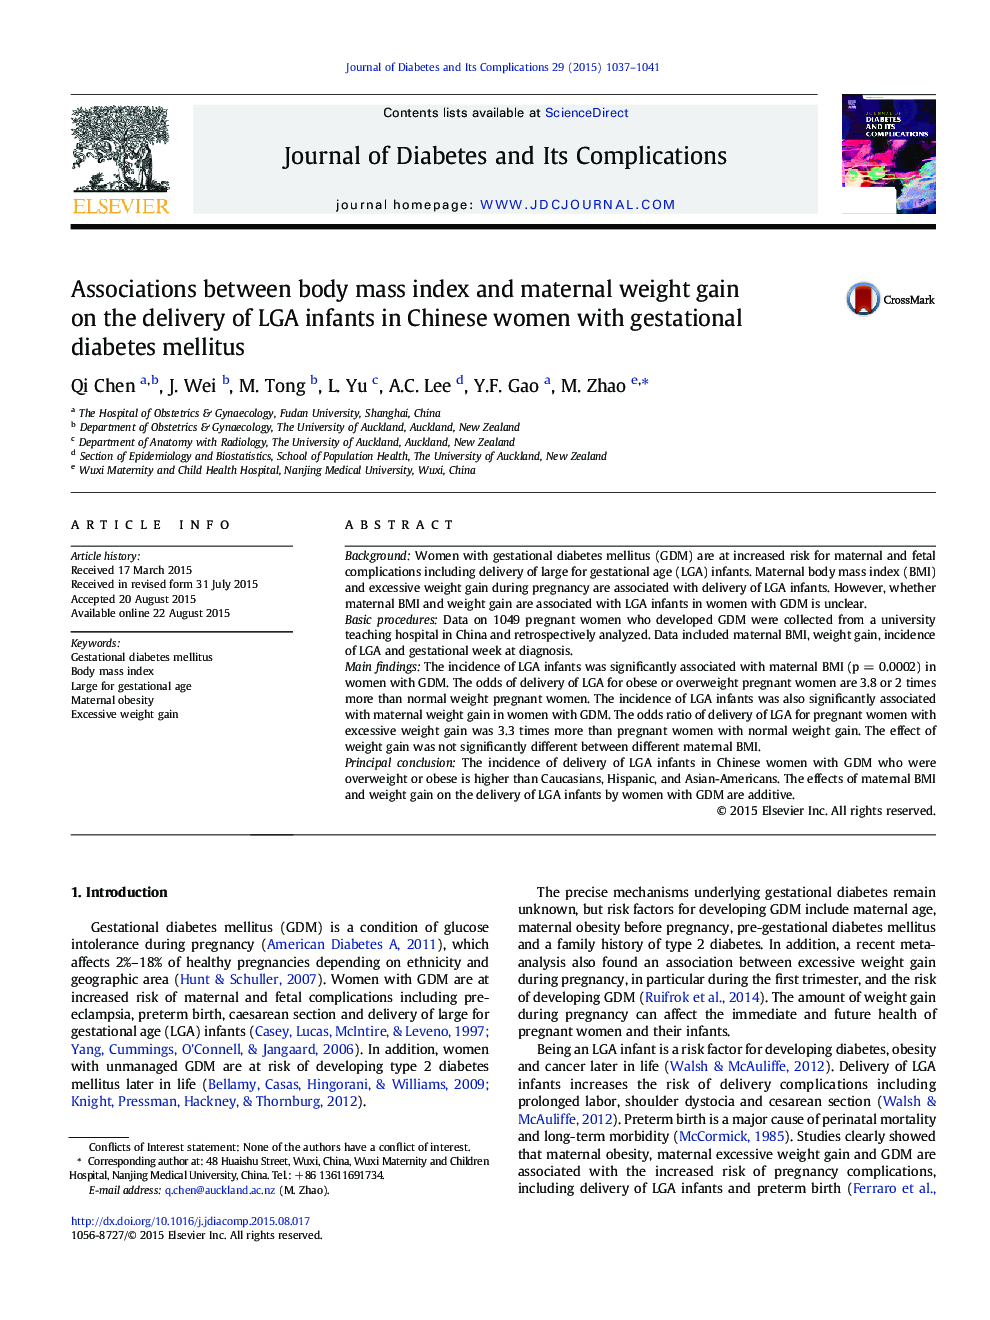 Associations between body mass index and maternal weight gain on the delivery of LGA infants in Chinese women with gestational diabetes mellitus